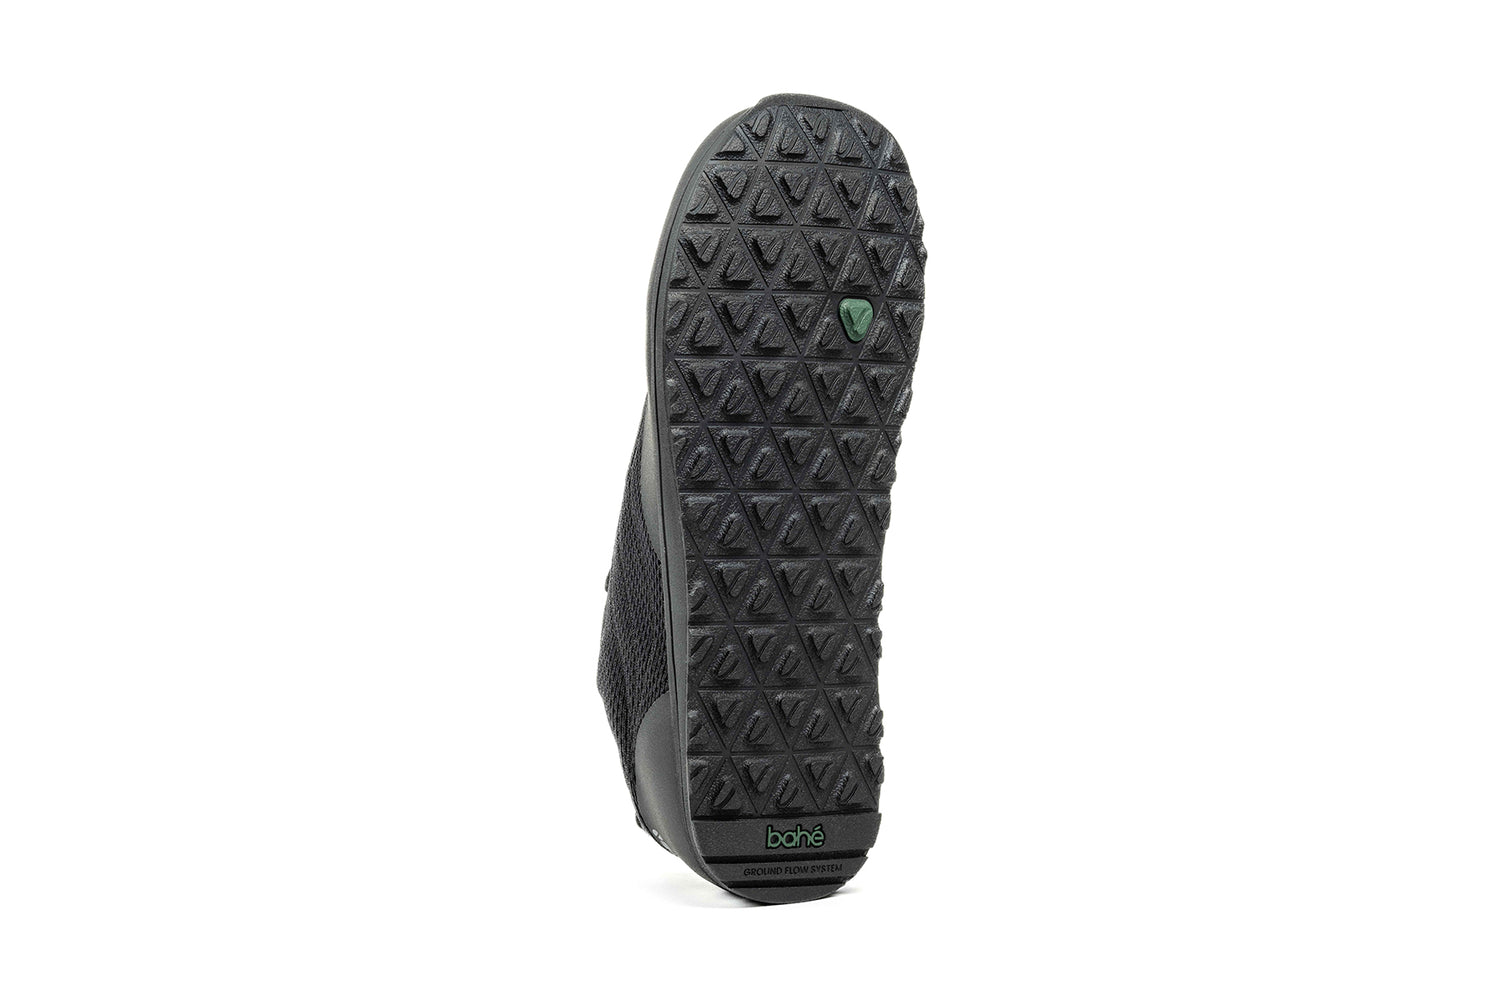 Outsole of Bahé Revive barefoot style grounding shoes in Eclipse (black)